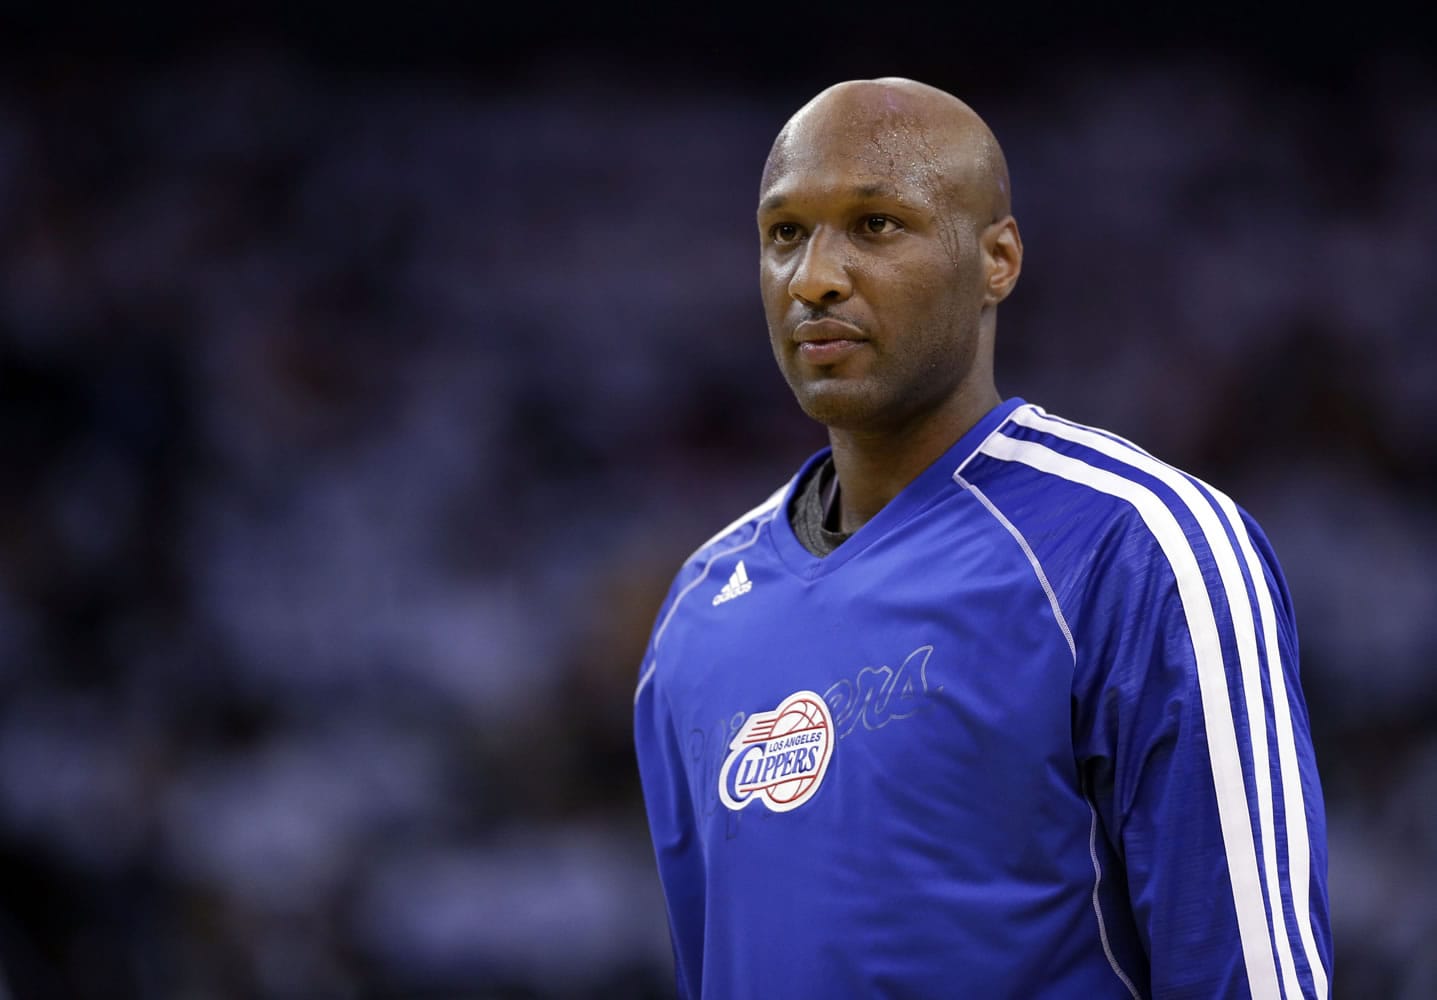 Los Angeles Clippers&#039; Lamar Odom (7) in action against the Golden State Warriors during an NBA basketball game in Oakland, Calif., in 2013. Authorities say former NBA and reality TV star Odom has been hospitalized after he was found unconscious at a Nevada brothel.